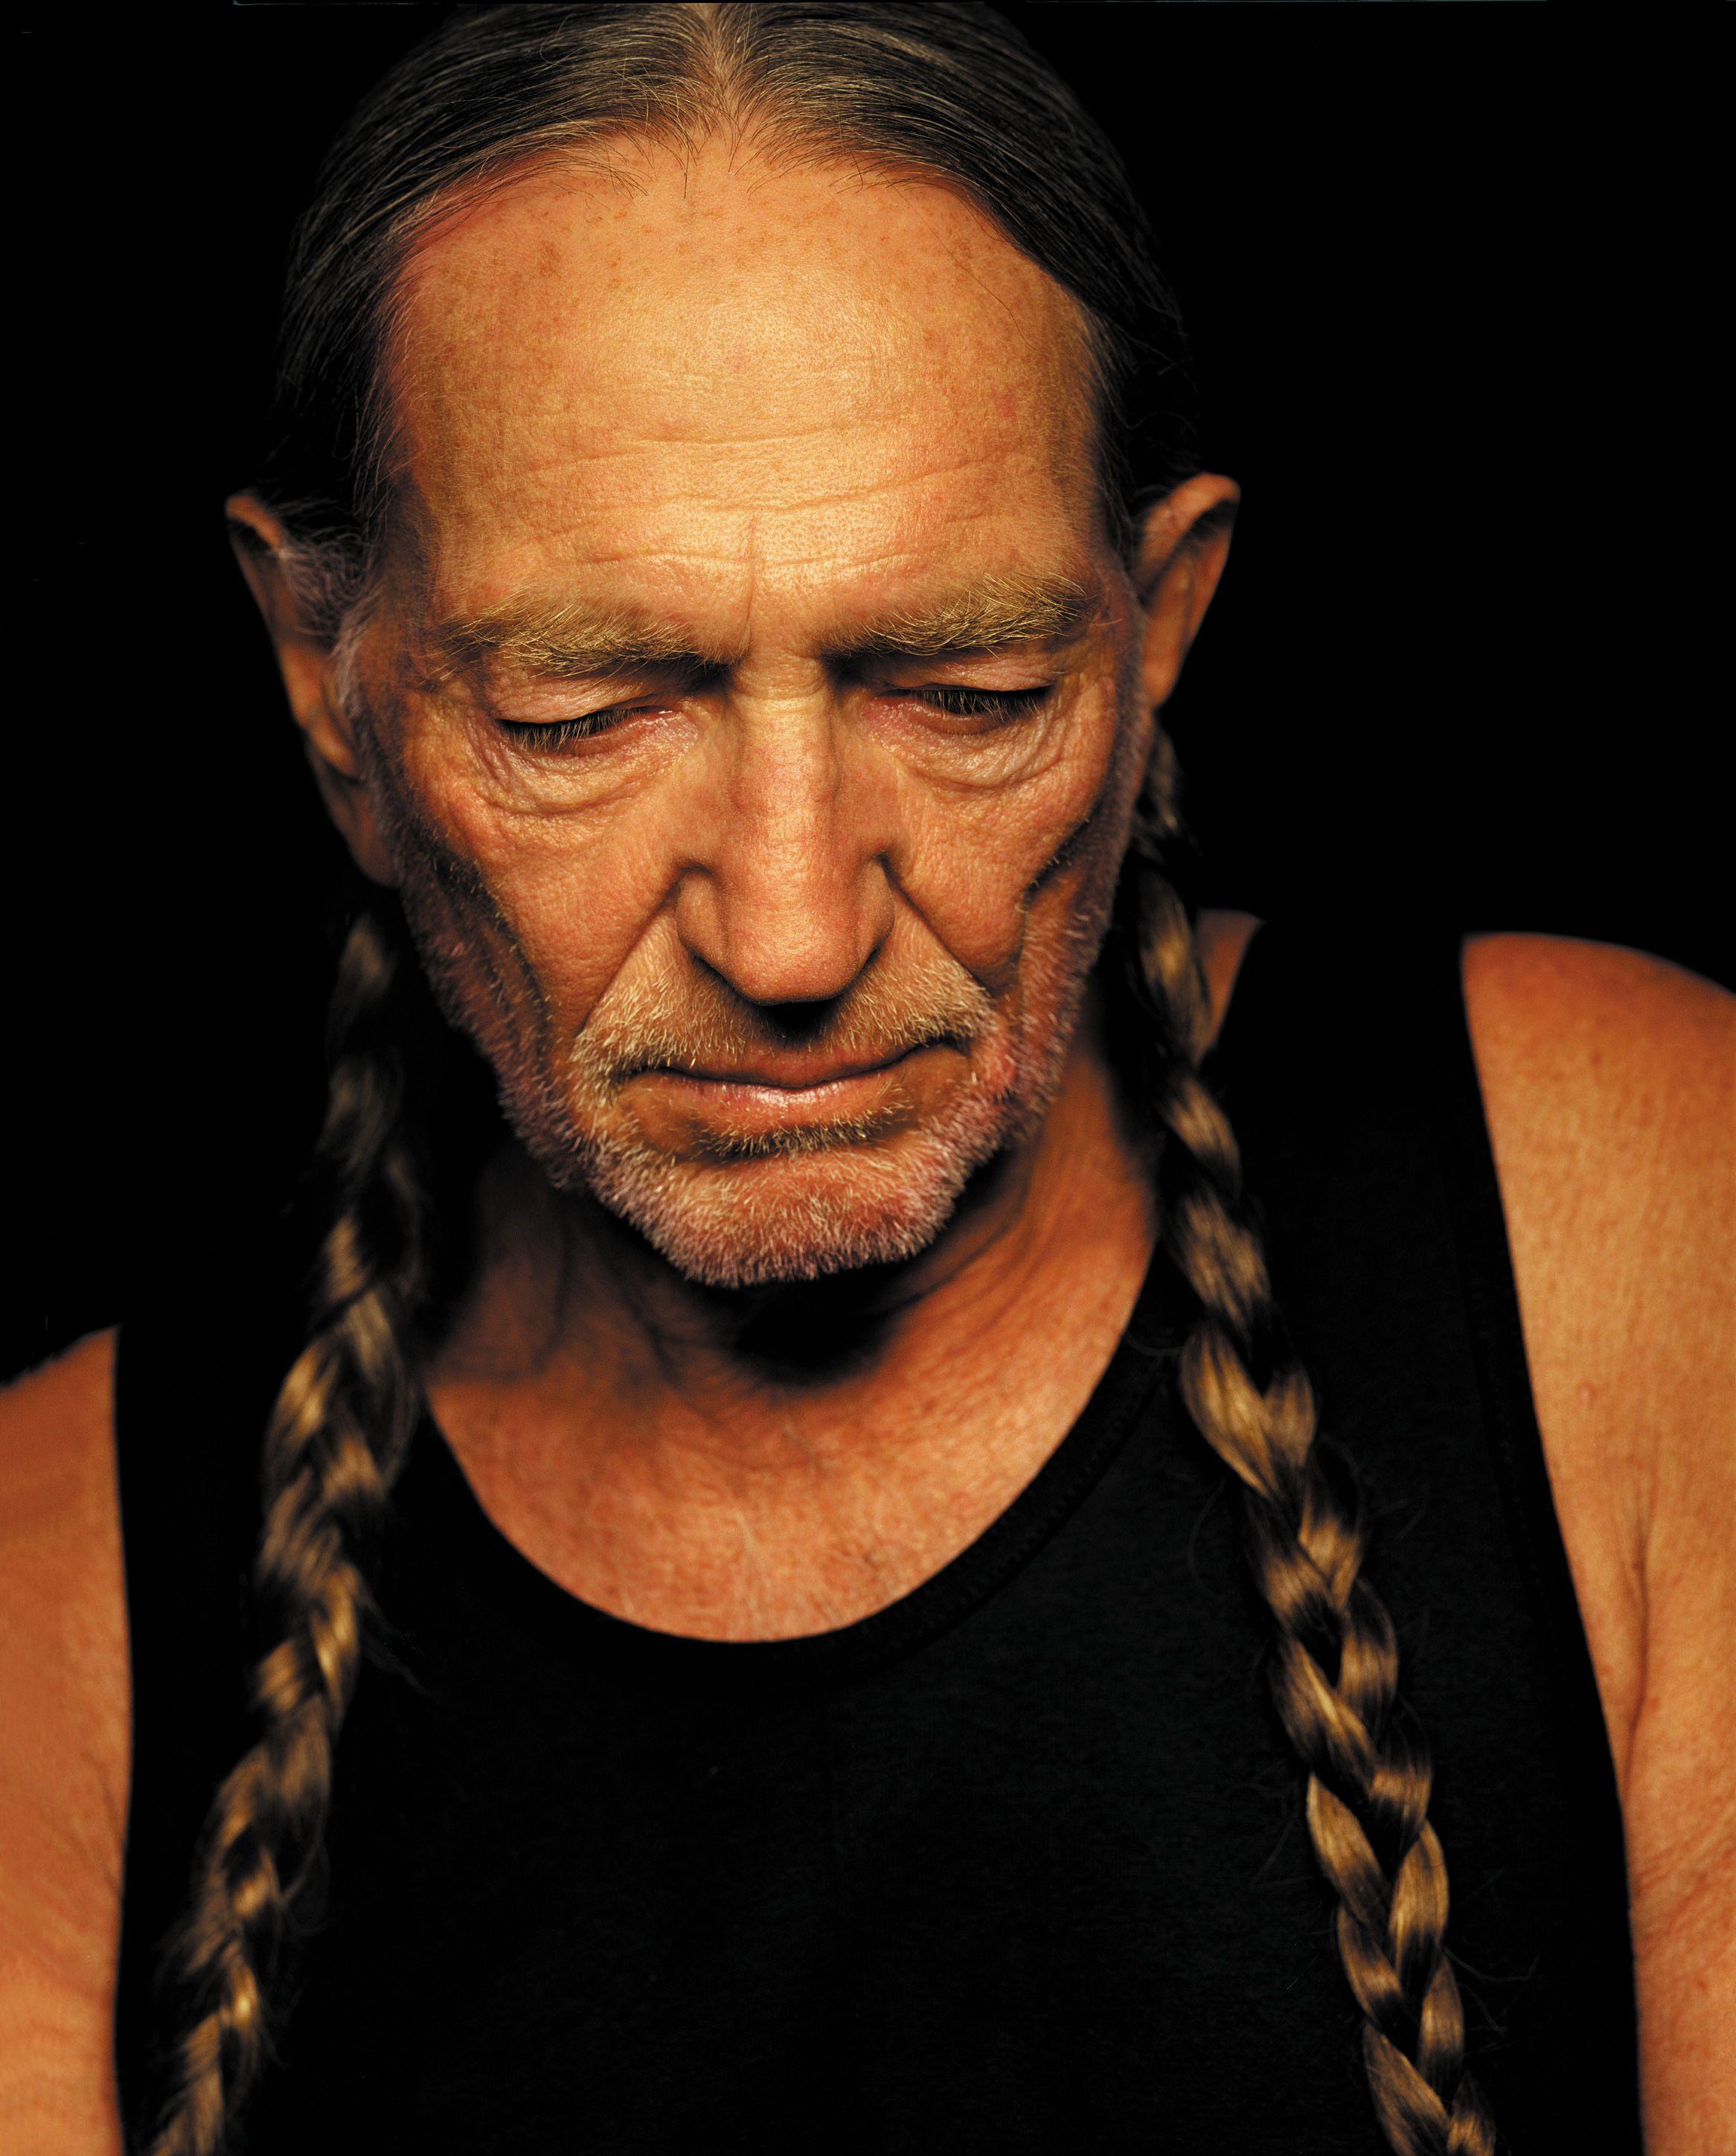 More Beautiful Willie Nelson Wallpaper